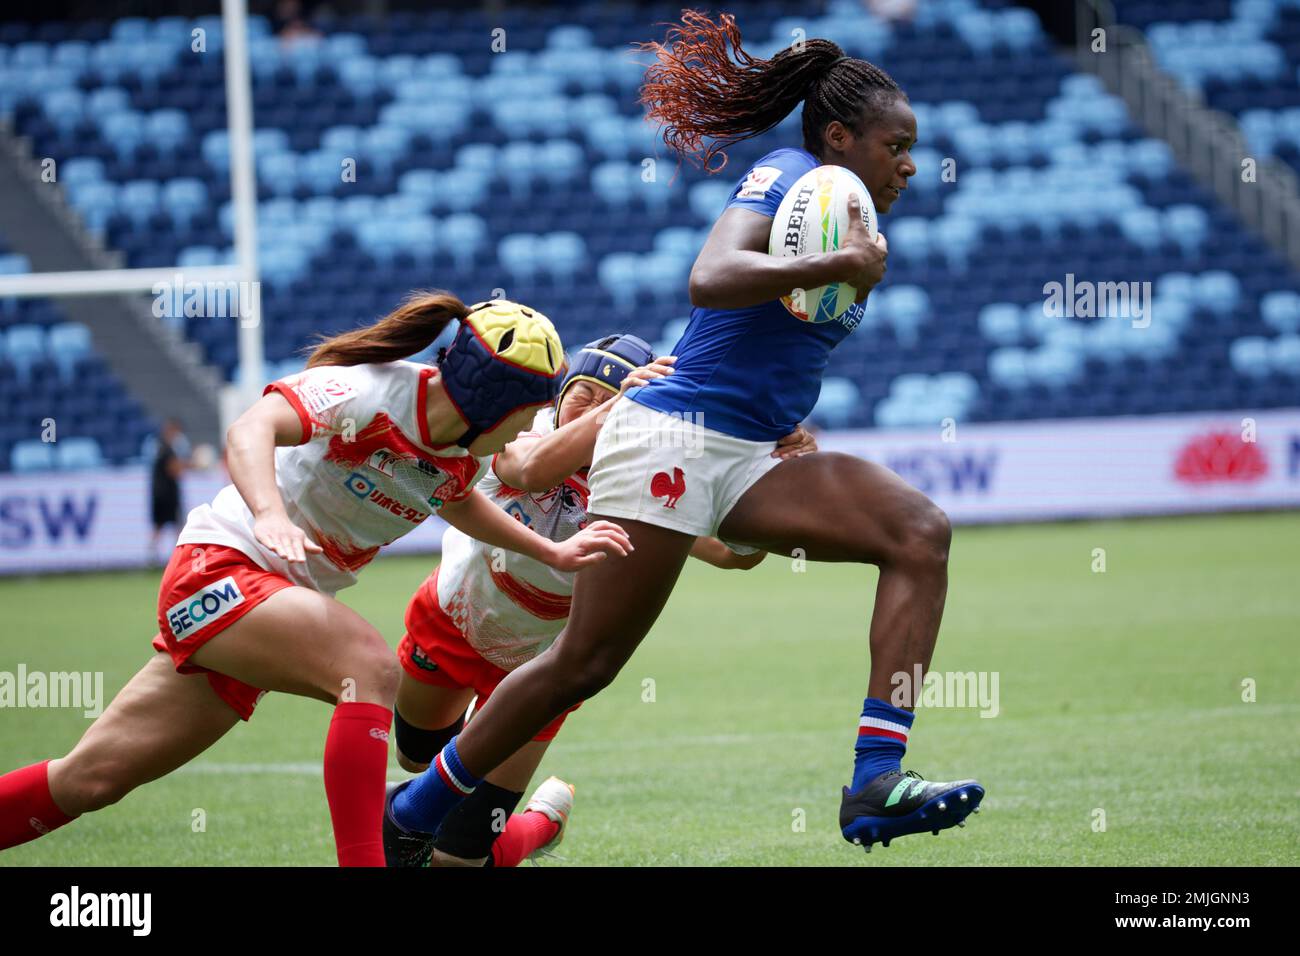 Sydney, Australia. 27th Jan 2023. Séraphine Okemba is tackled during the 2023 Sydney Sevens match between Japan and France at Allianz Stadium on January 27, 2023 in Sydney, Australia Credit: IOIO IMAGES/Alamy Live News Stock Photo